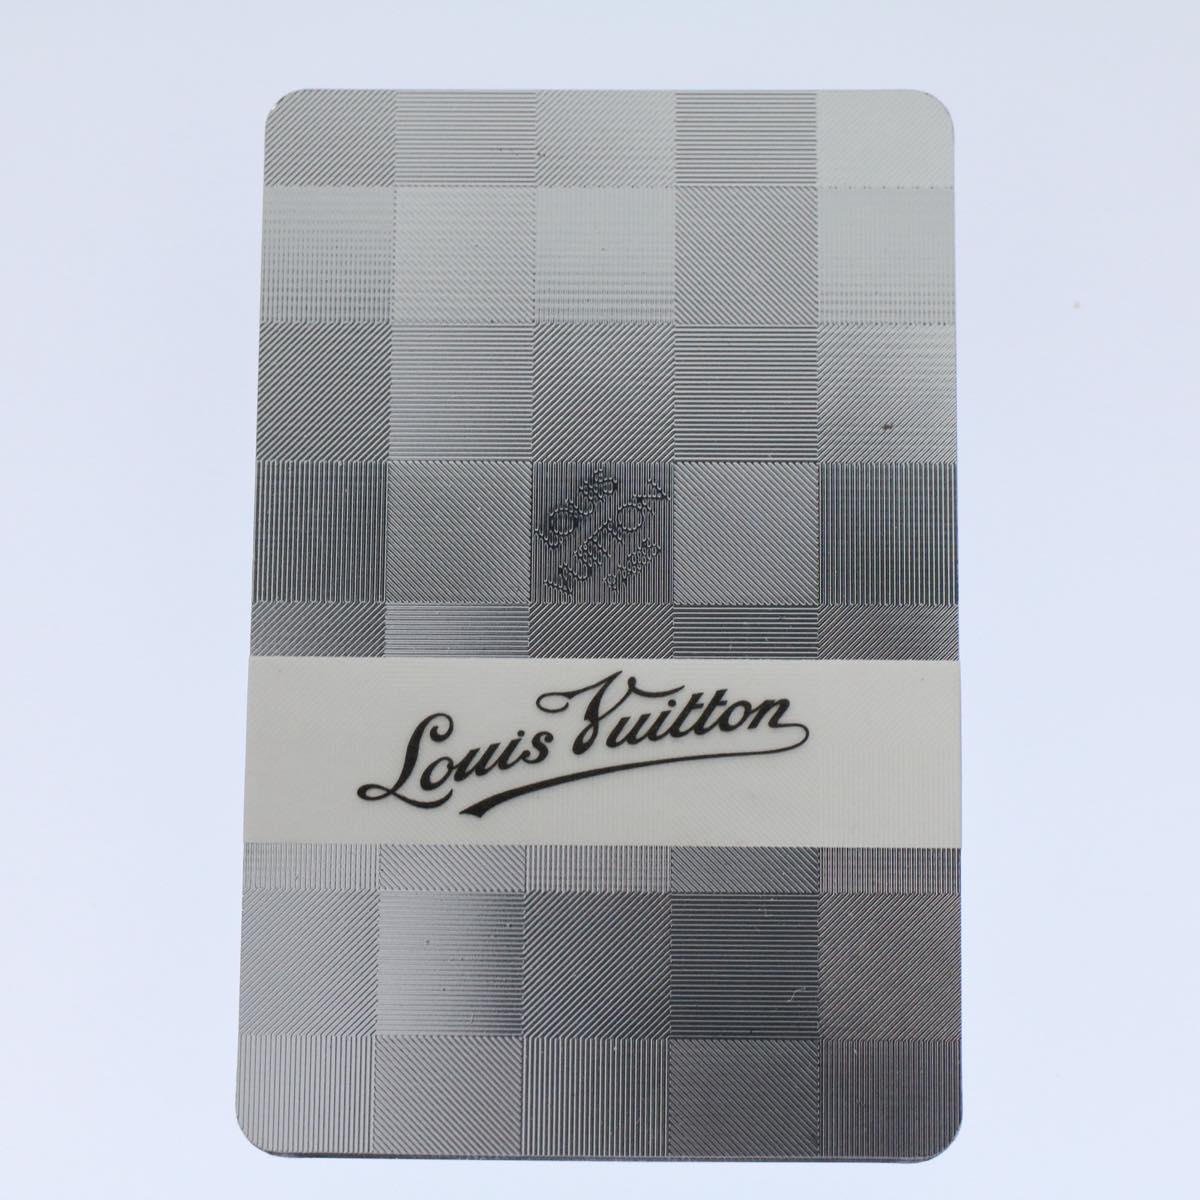 LOUIS VUITTON Playing Cards Gold Silver LV Auth 58595S